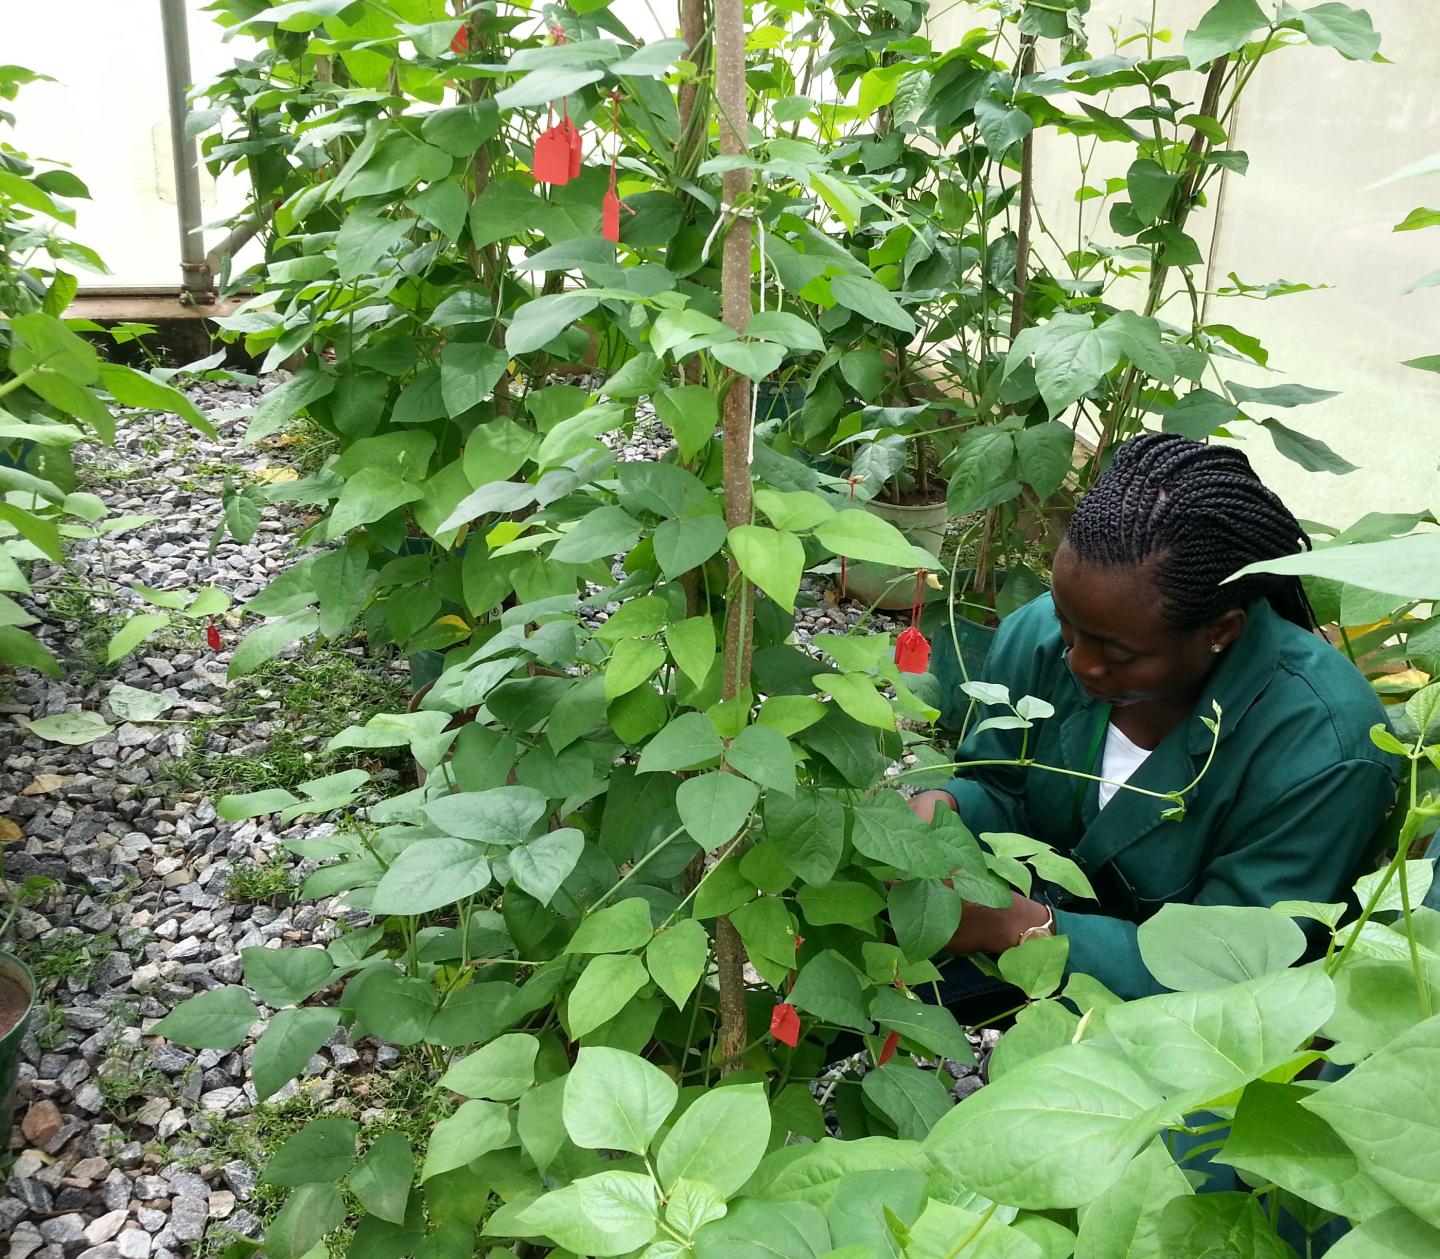 Researcher and Cowpea